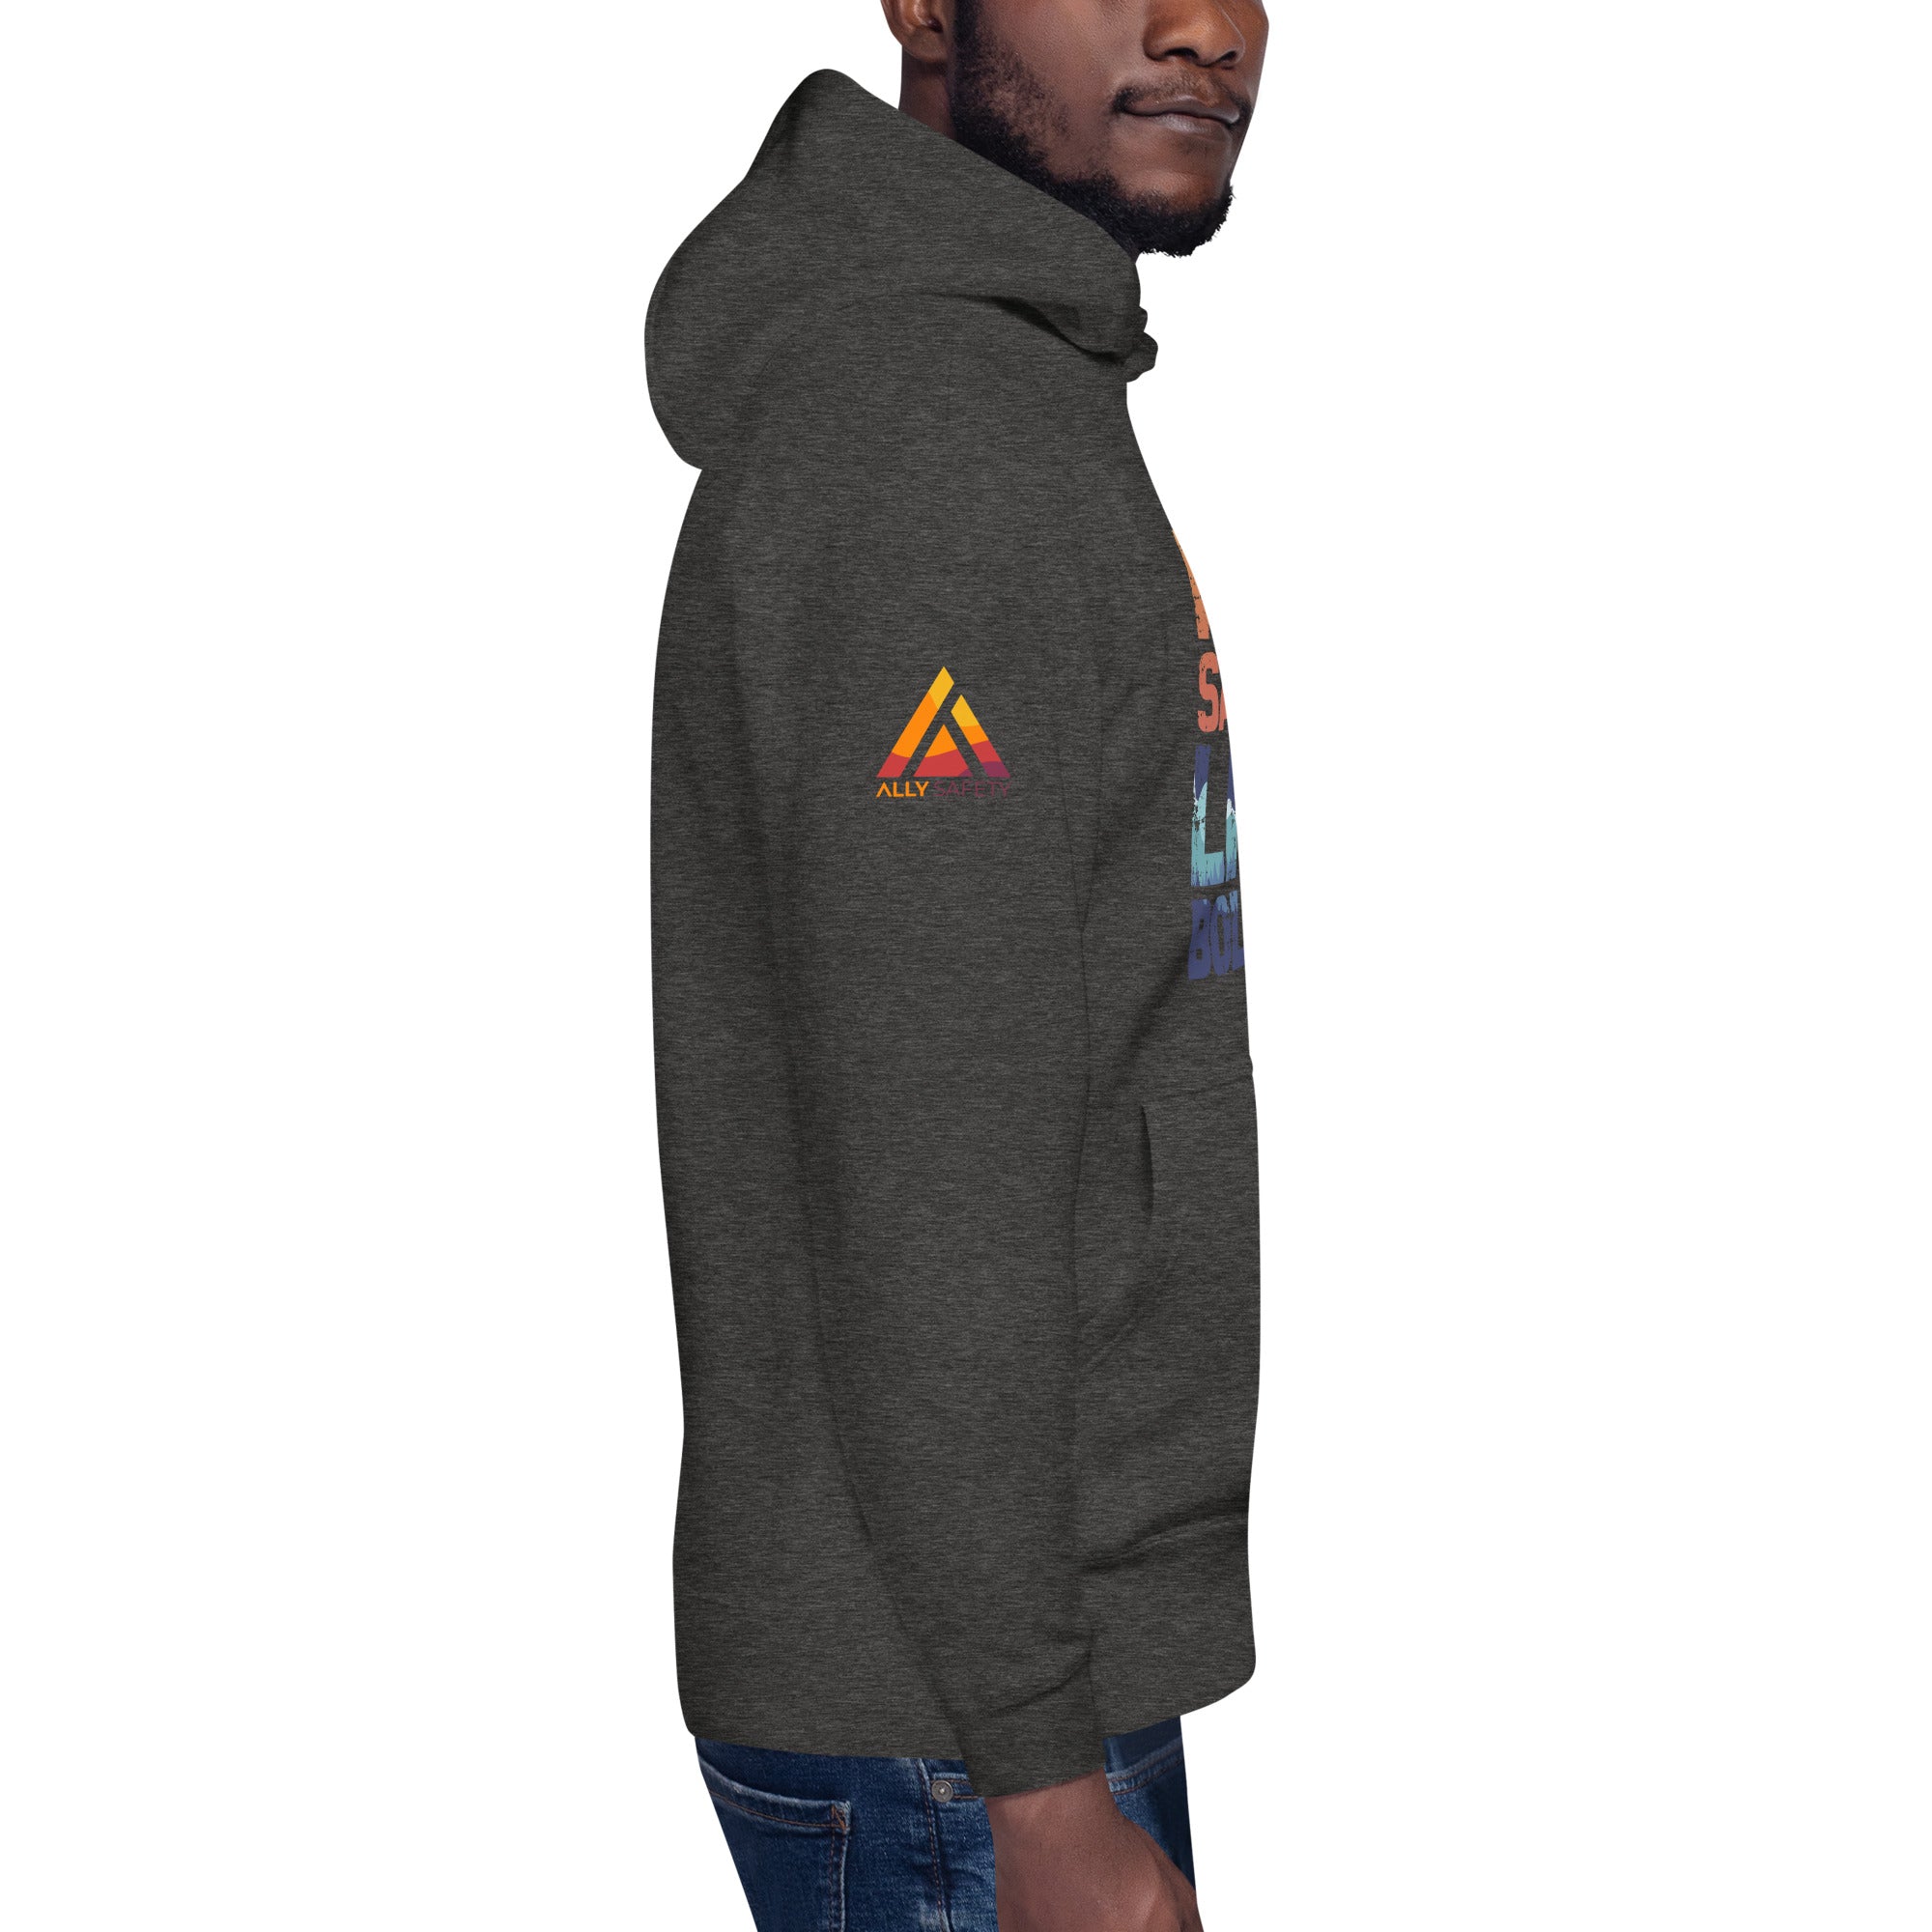 Work Safely, Live Boldly™ Hoodie